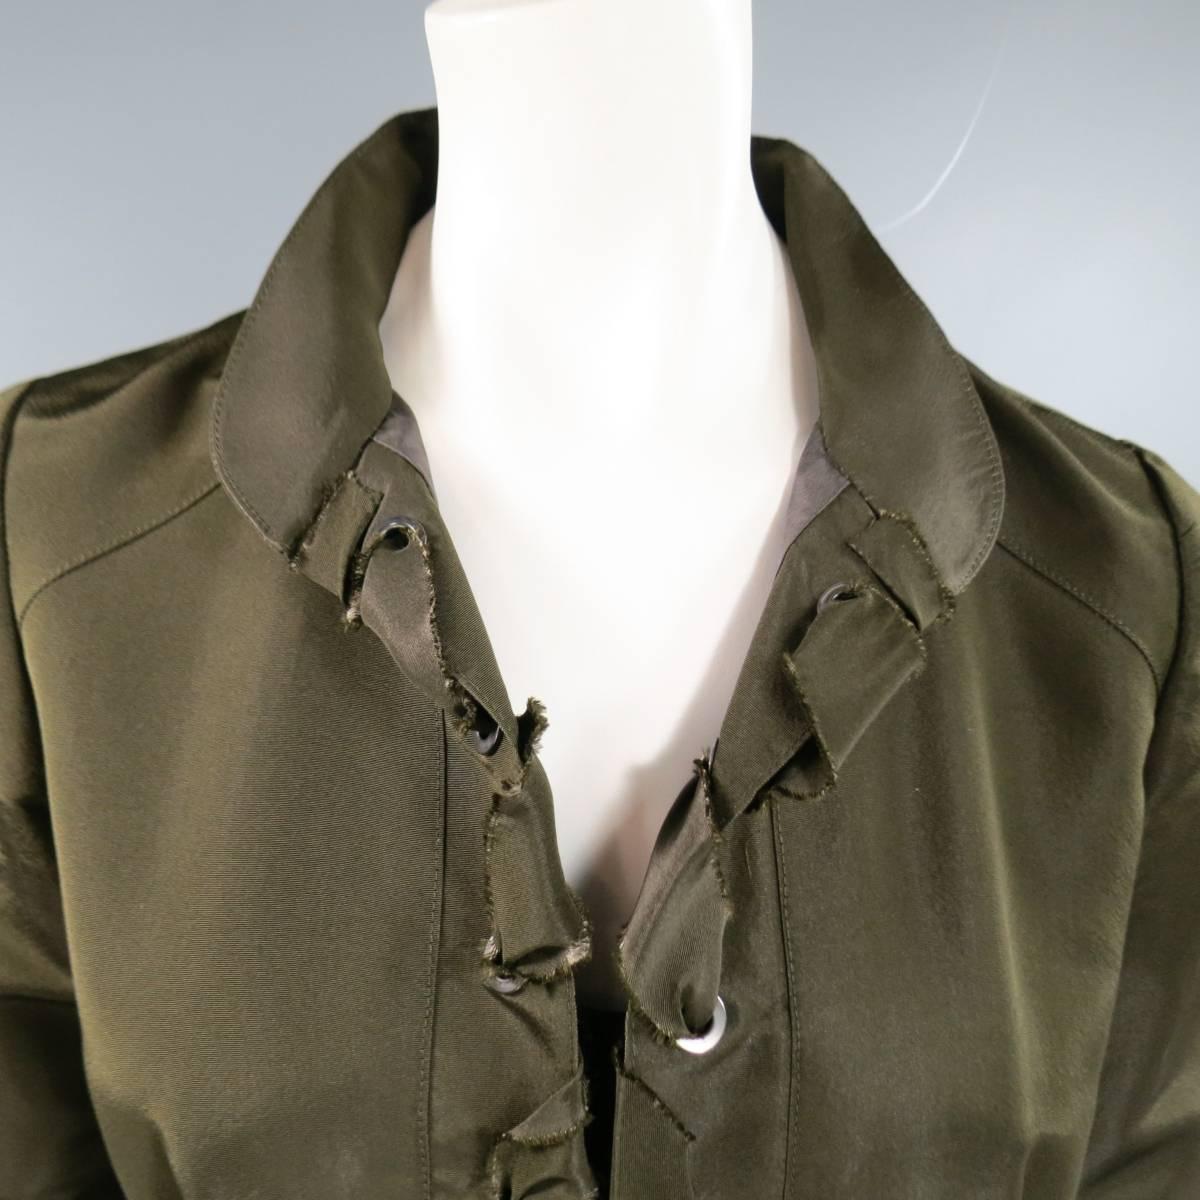 This stunning OSCAR DE LA RENTE cocktail dress comes in olive khaki green silk taffeta and features a 3/4 sleeve, rounded collar, cinched waist with double faux flap pockets, pleated bubble A line skirt, and double placket front with silver tone